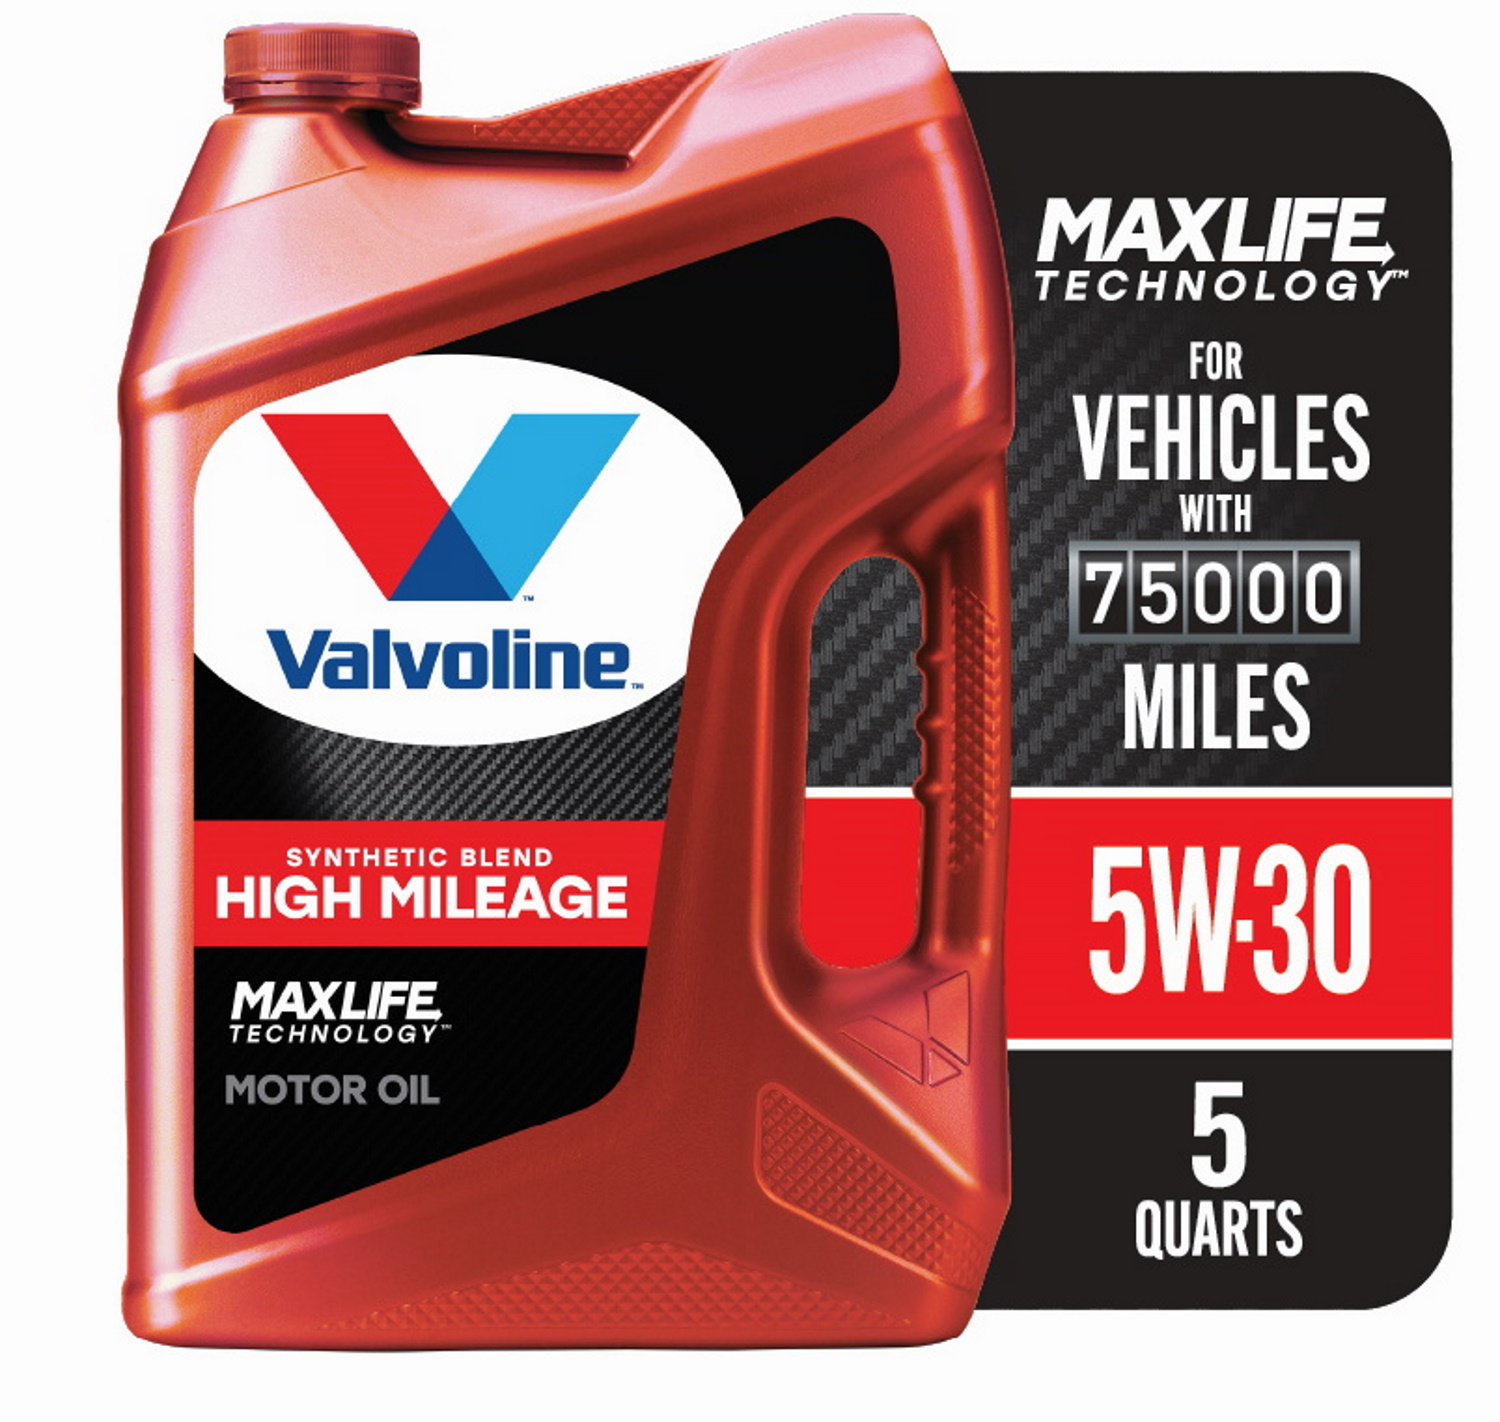 Valvoline High Mileage with MaxLife Technology SAE 5W-30 Synthetic Blend Motor Oil 5 QT - image 1 of 8